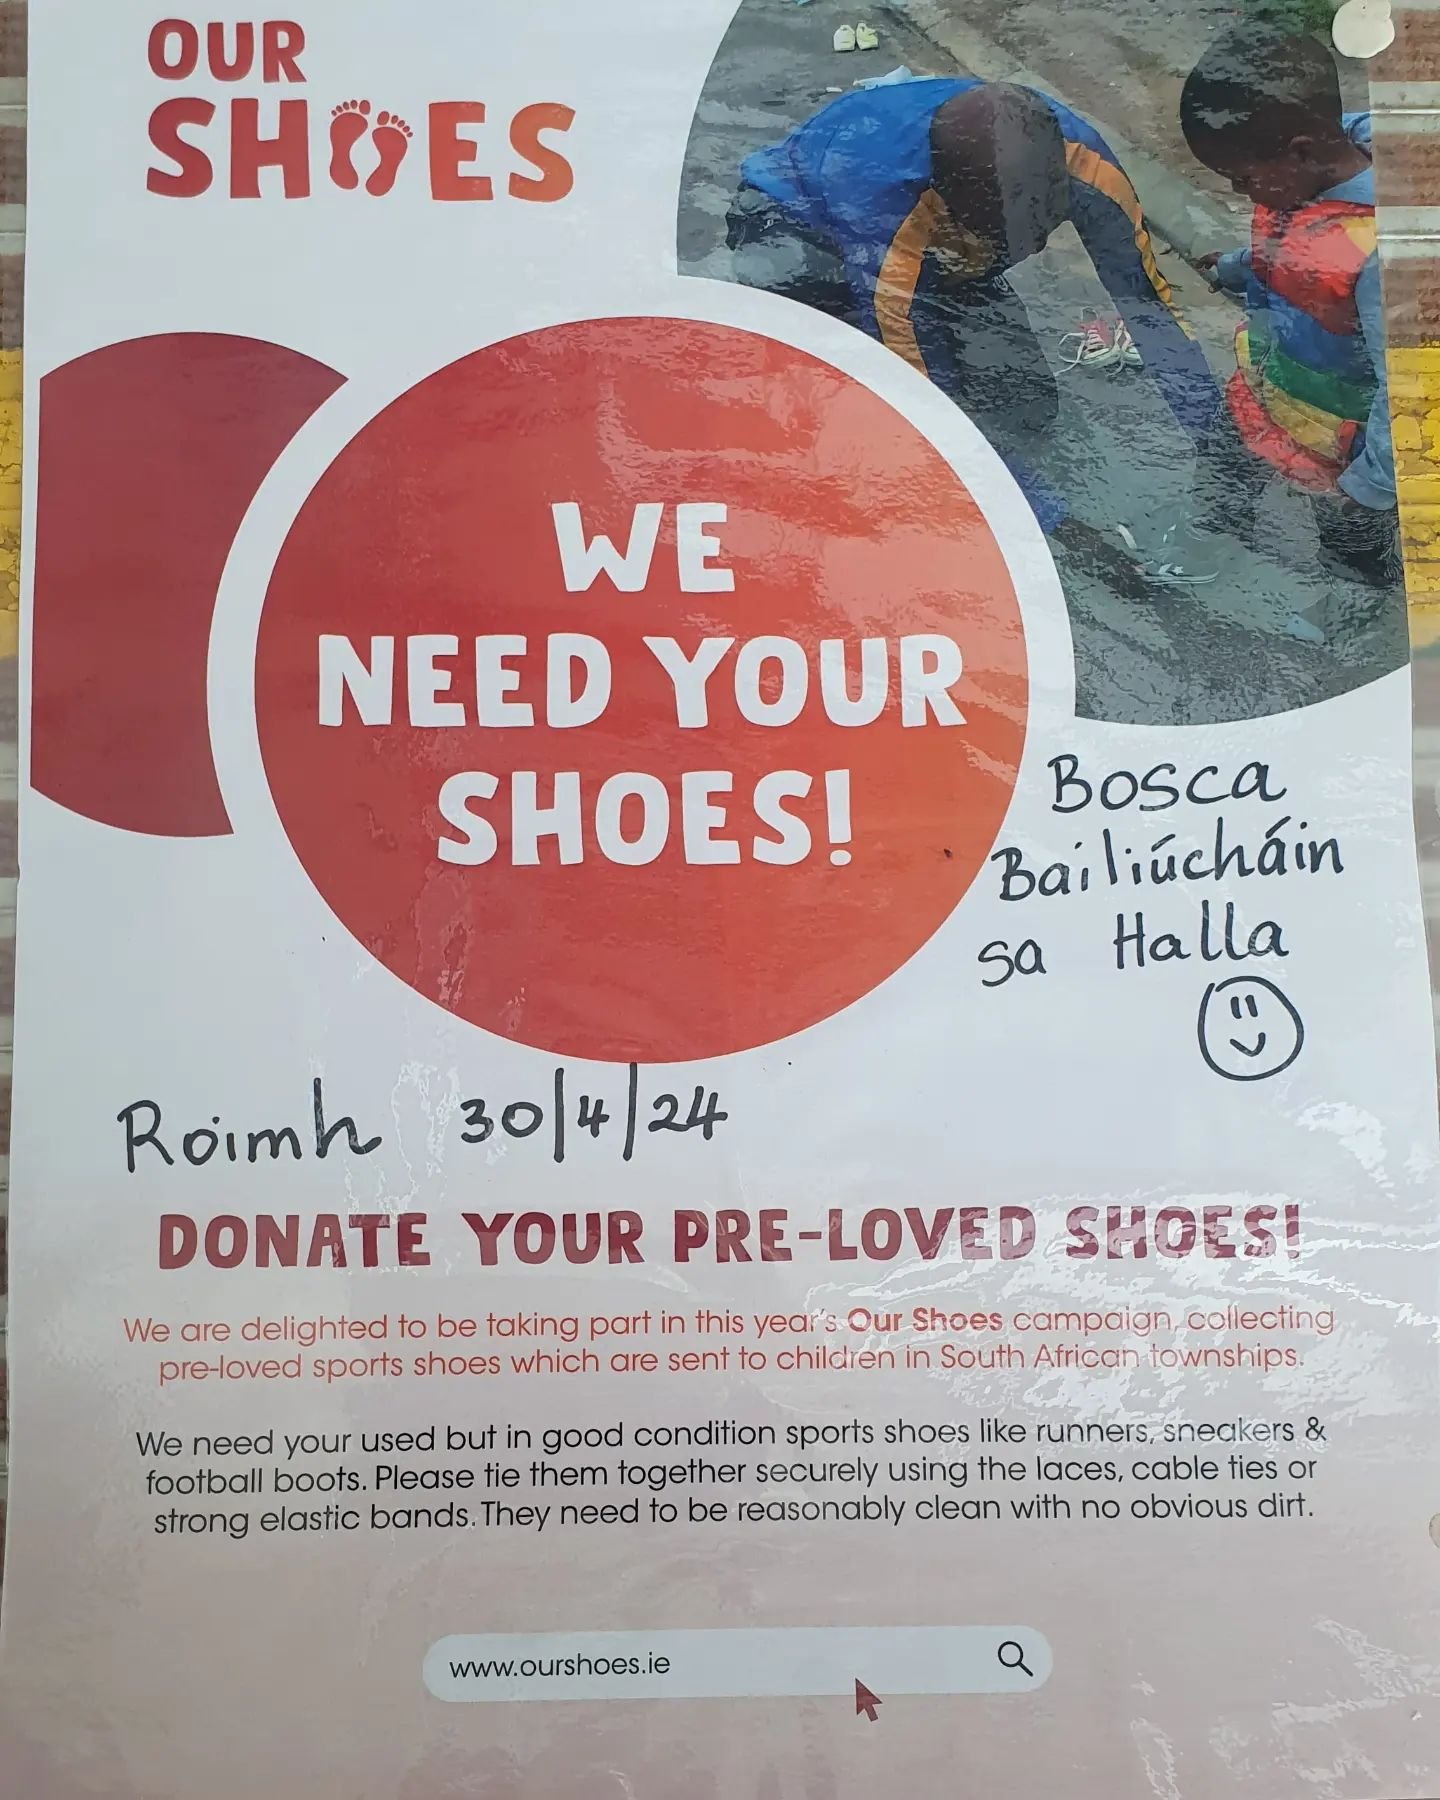 Baili&uacute;ch&aacute;n sean-bhr&oacute;g do charthanacht @ourshoescharity toimh 30&uacute; Aibre&aacute;n. 

Reminder of our old shoe collection for Our Shoes.